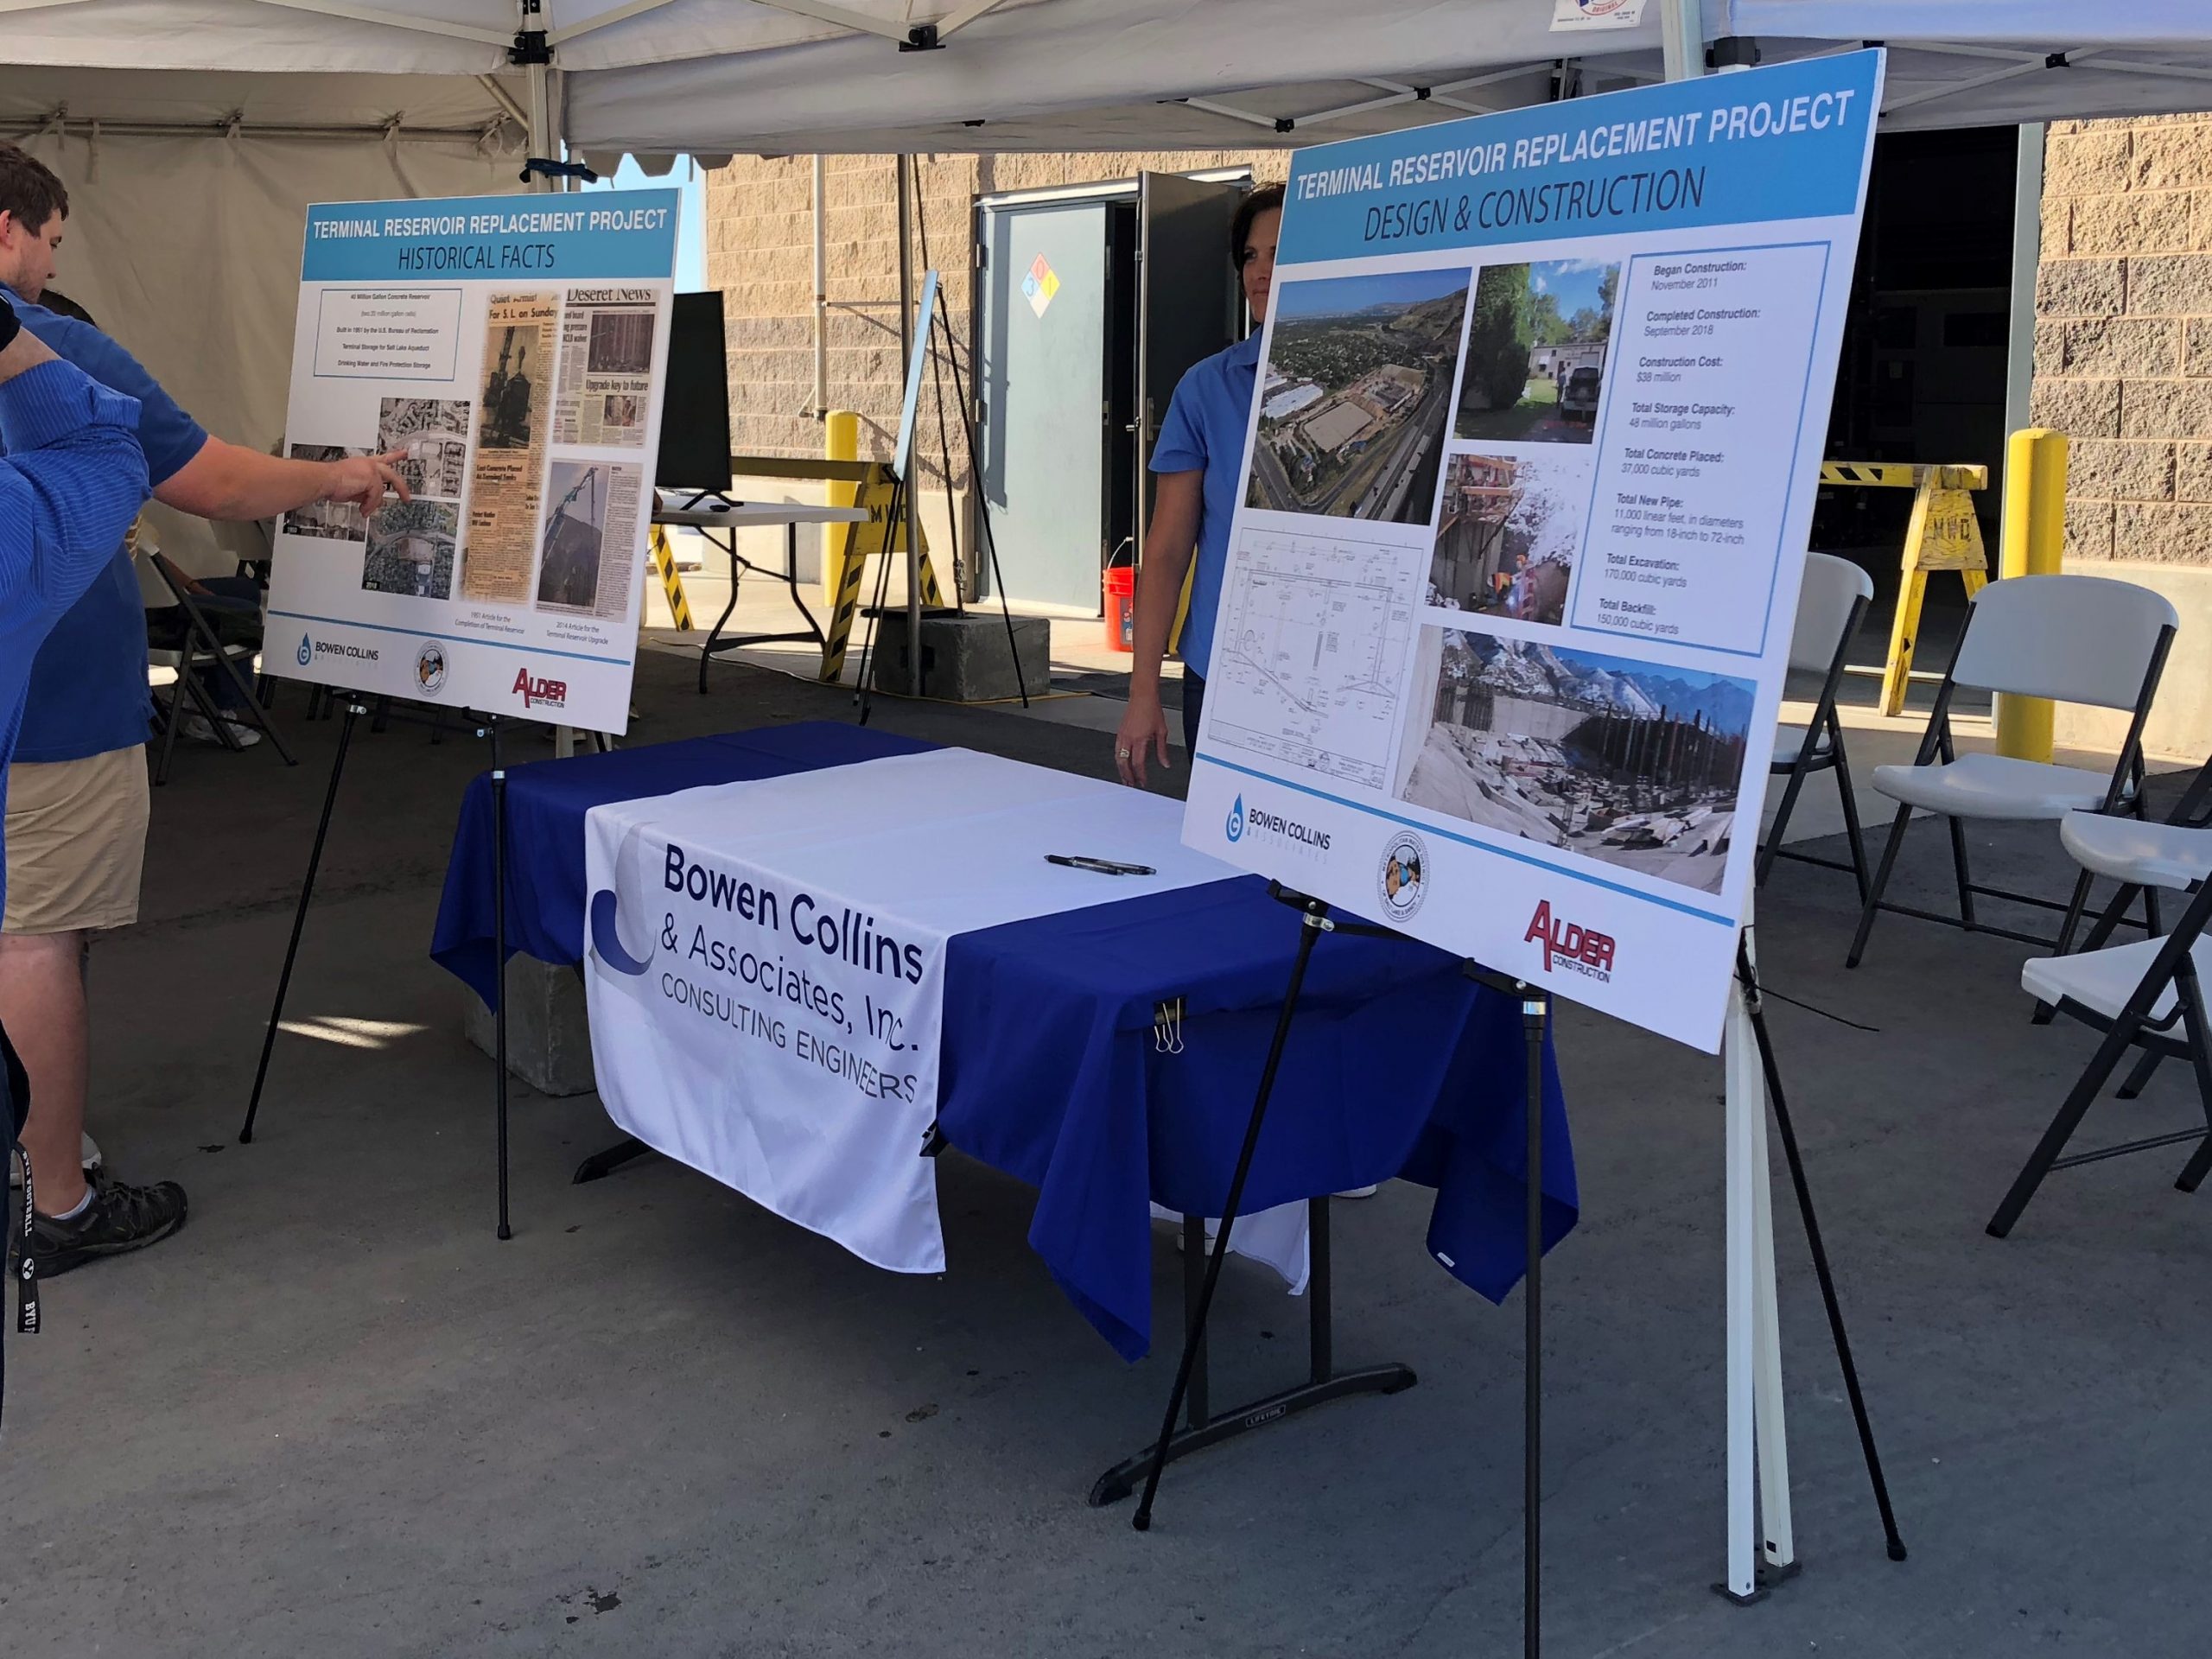 Bowen Collins booth set up under tent with posters providing information about the Terminal Reservoir design and construction.